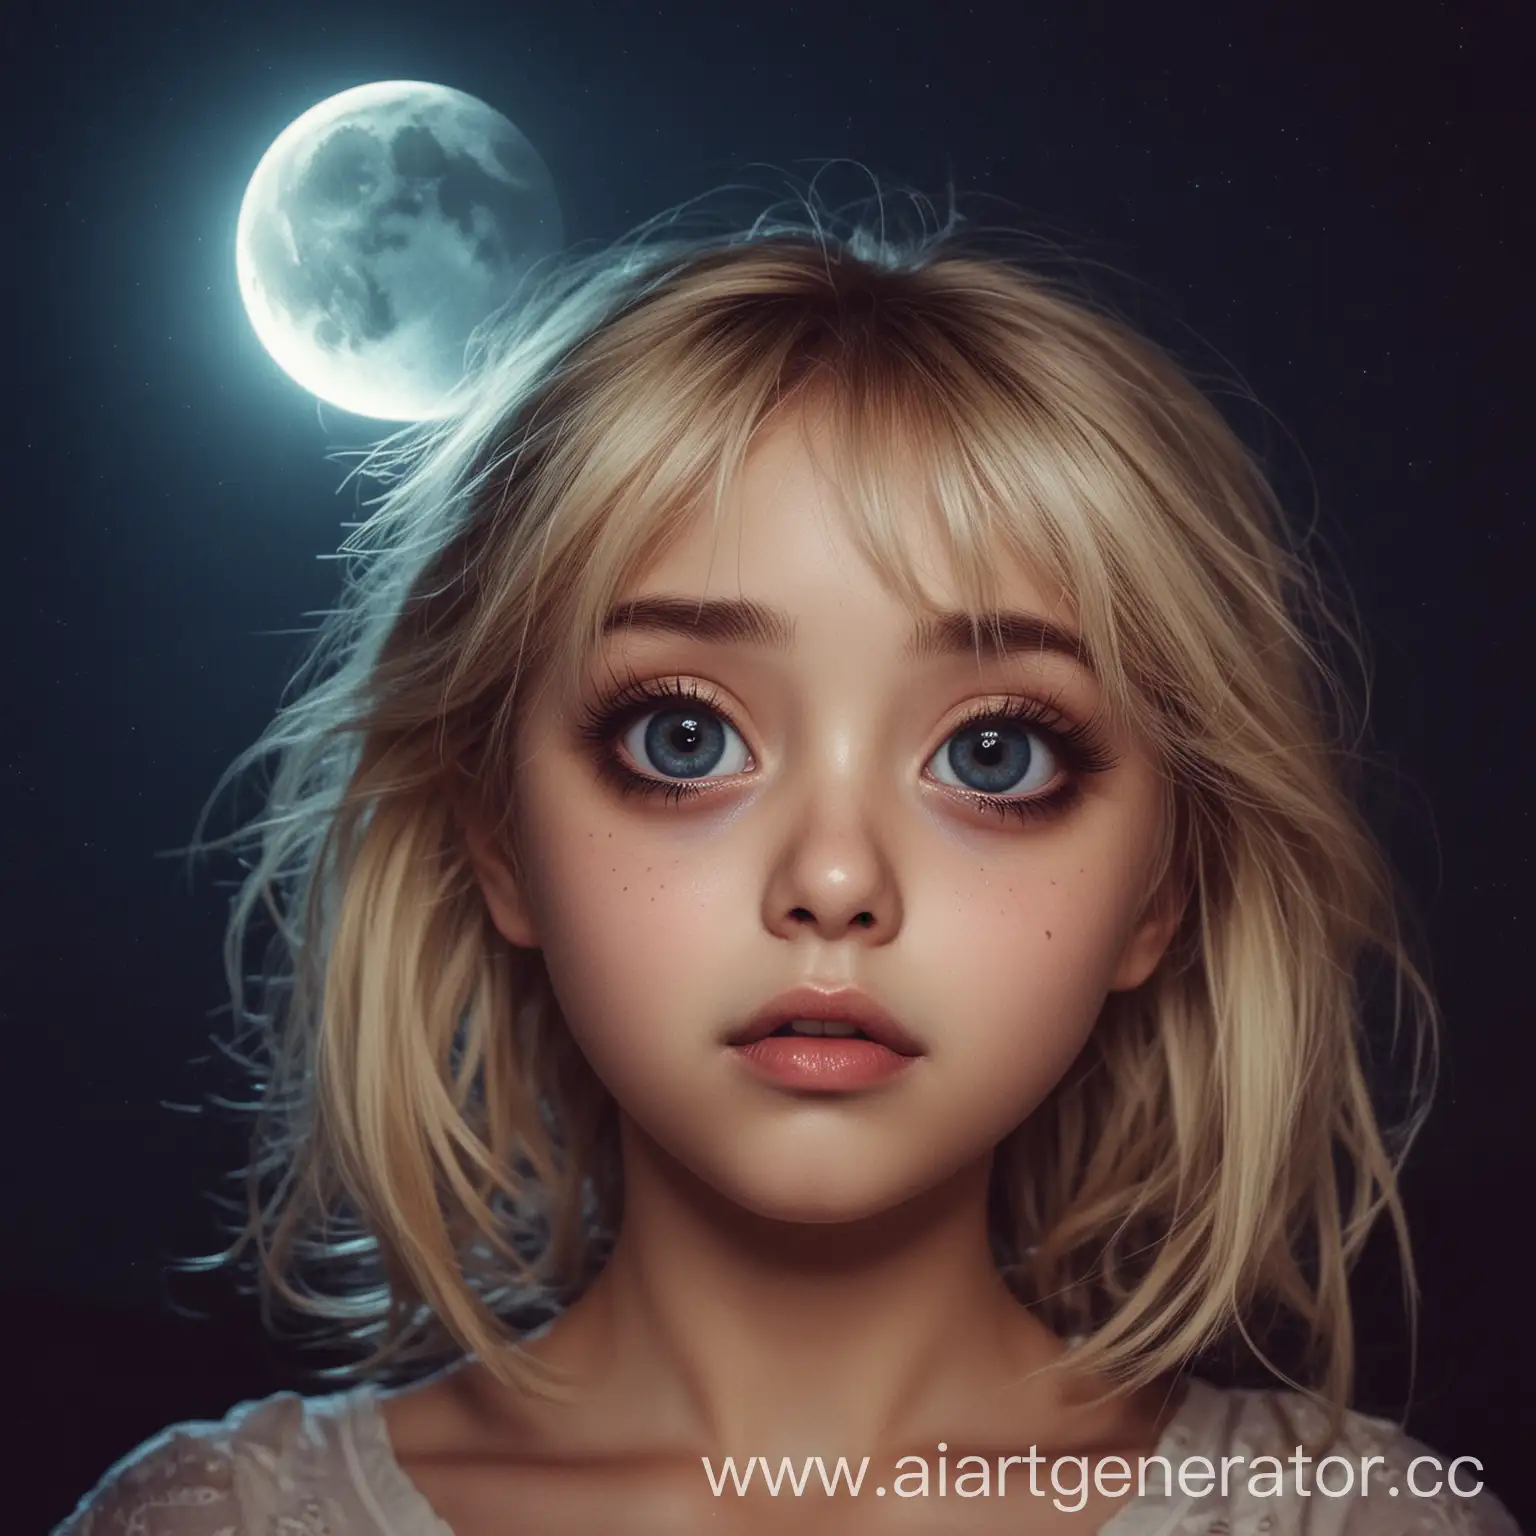 Enchanting-Blonde-Girl-Under-Moonlight-with-Wide-Eyes